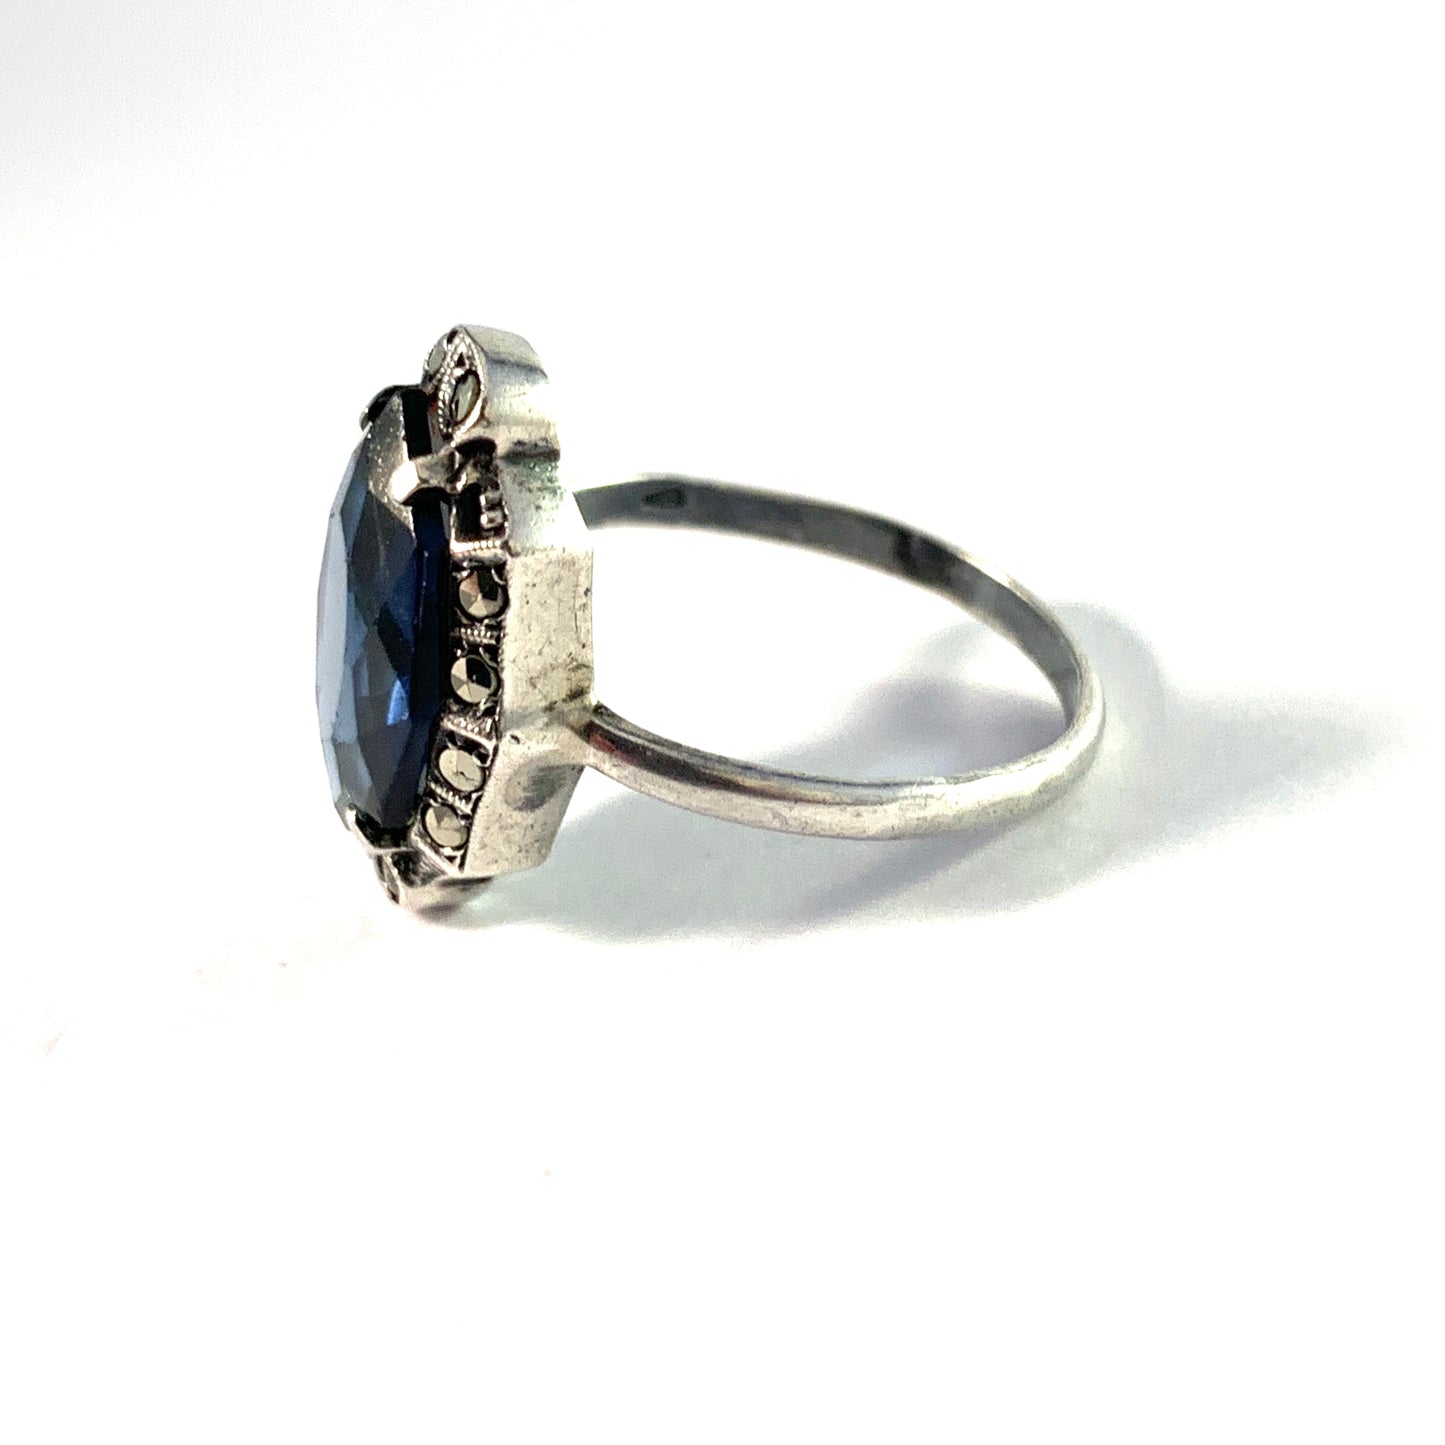 Austria (Finnish Import) 1937. Sterling 935 Silver Paste Marcasite Ring.